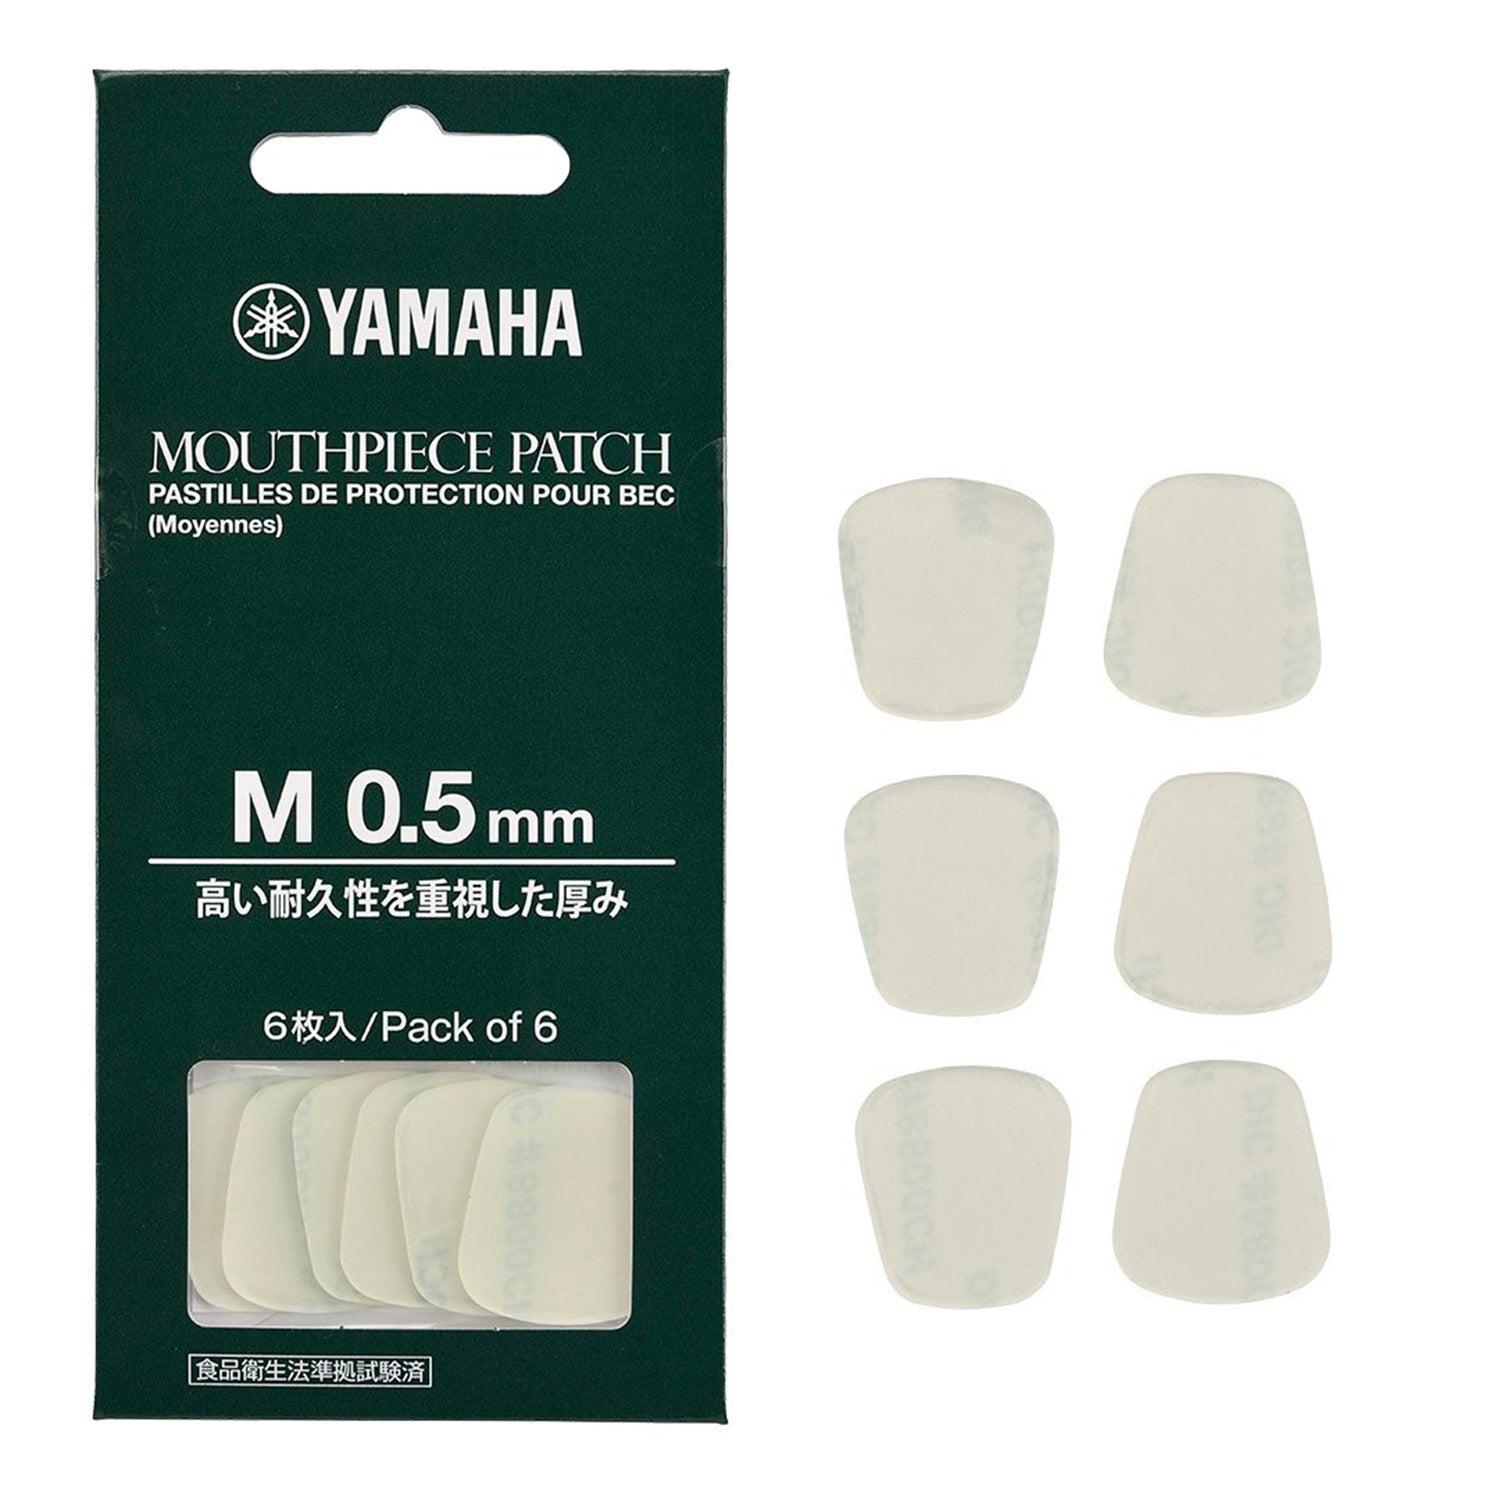 Green package of Yamaha mouthpiece patches, with six patches laid out next to it, all on a white background